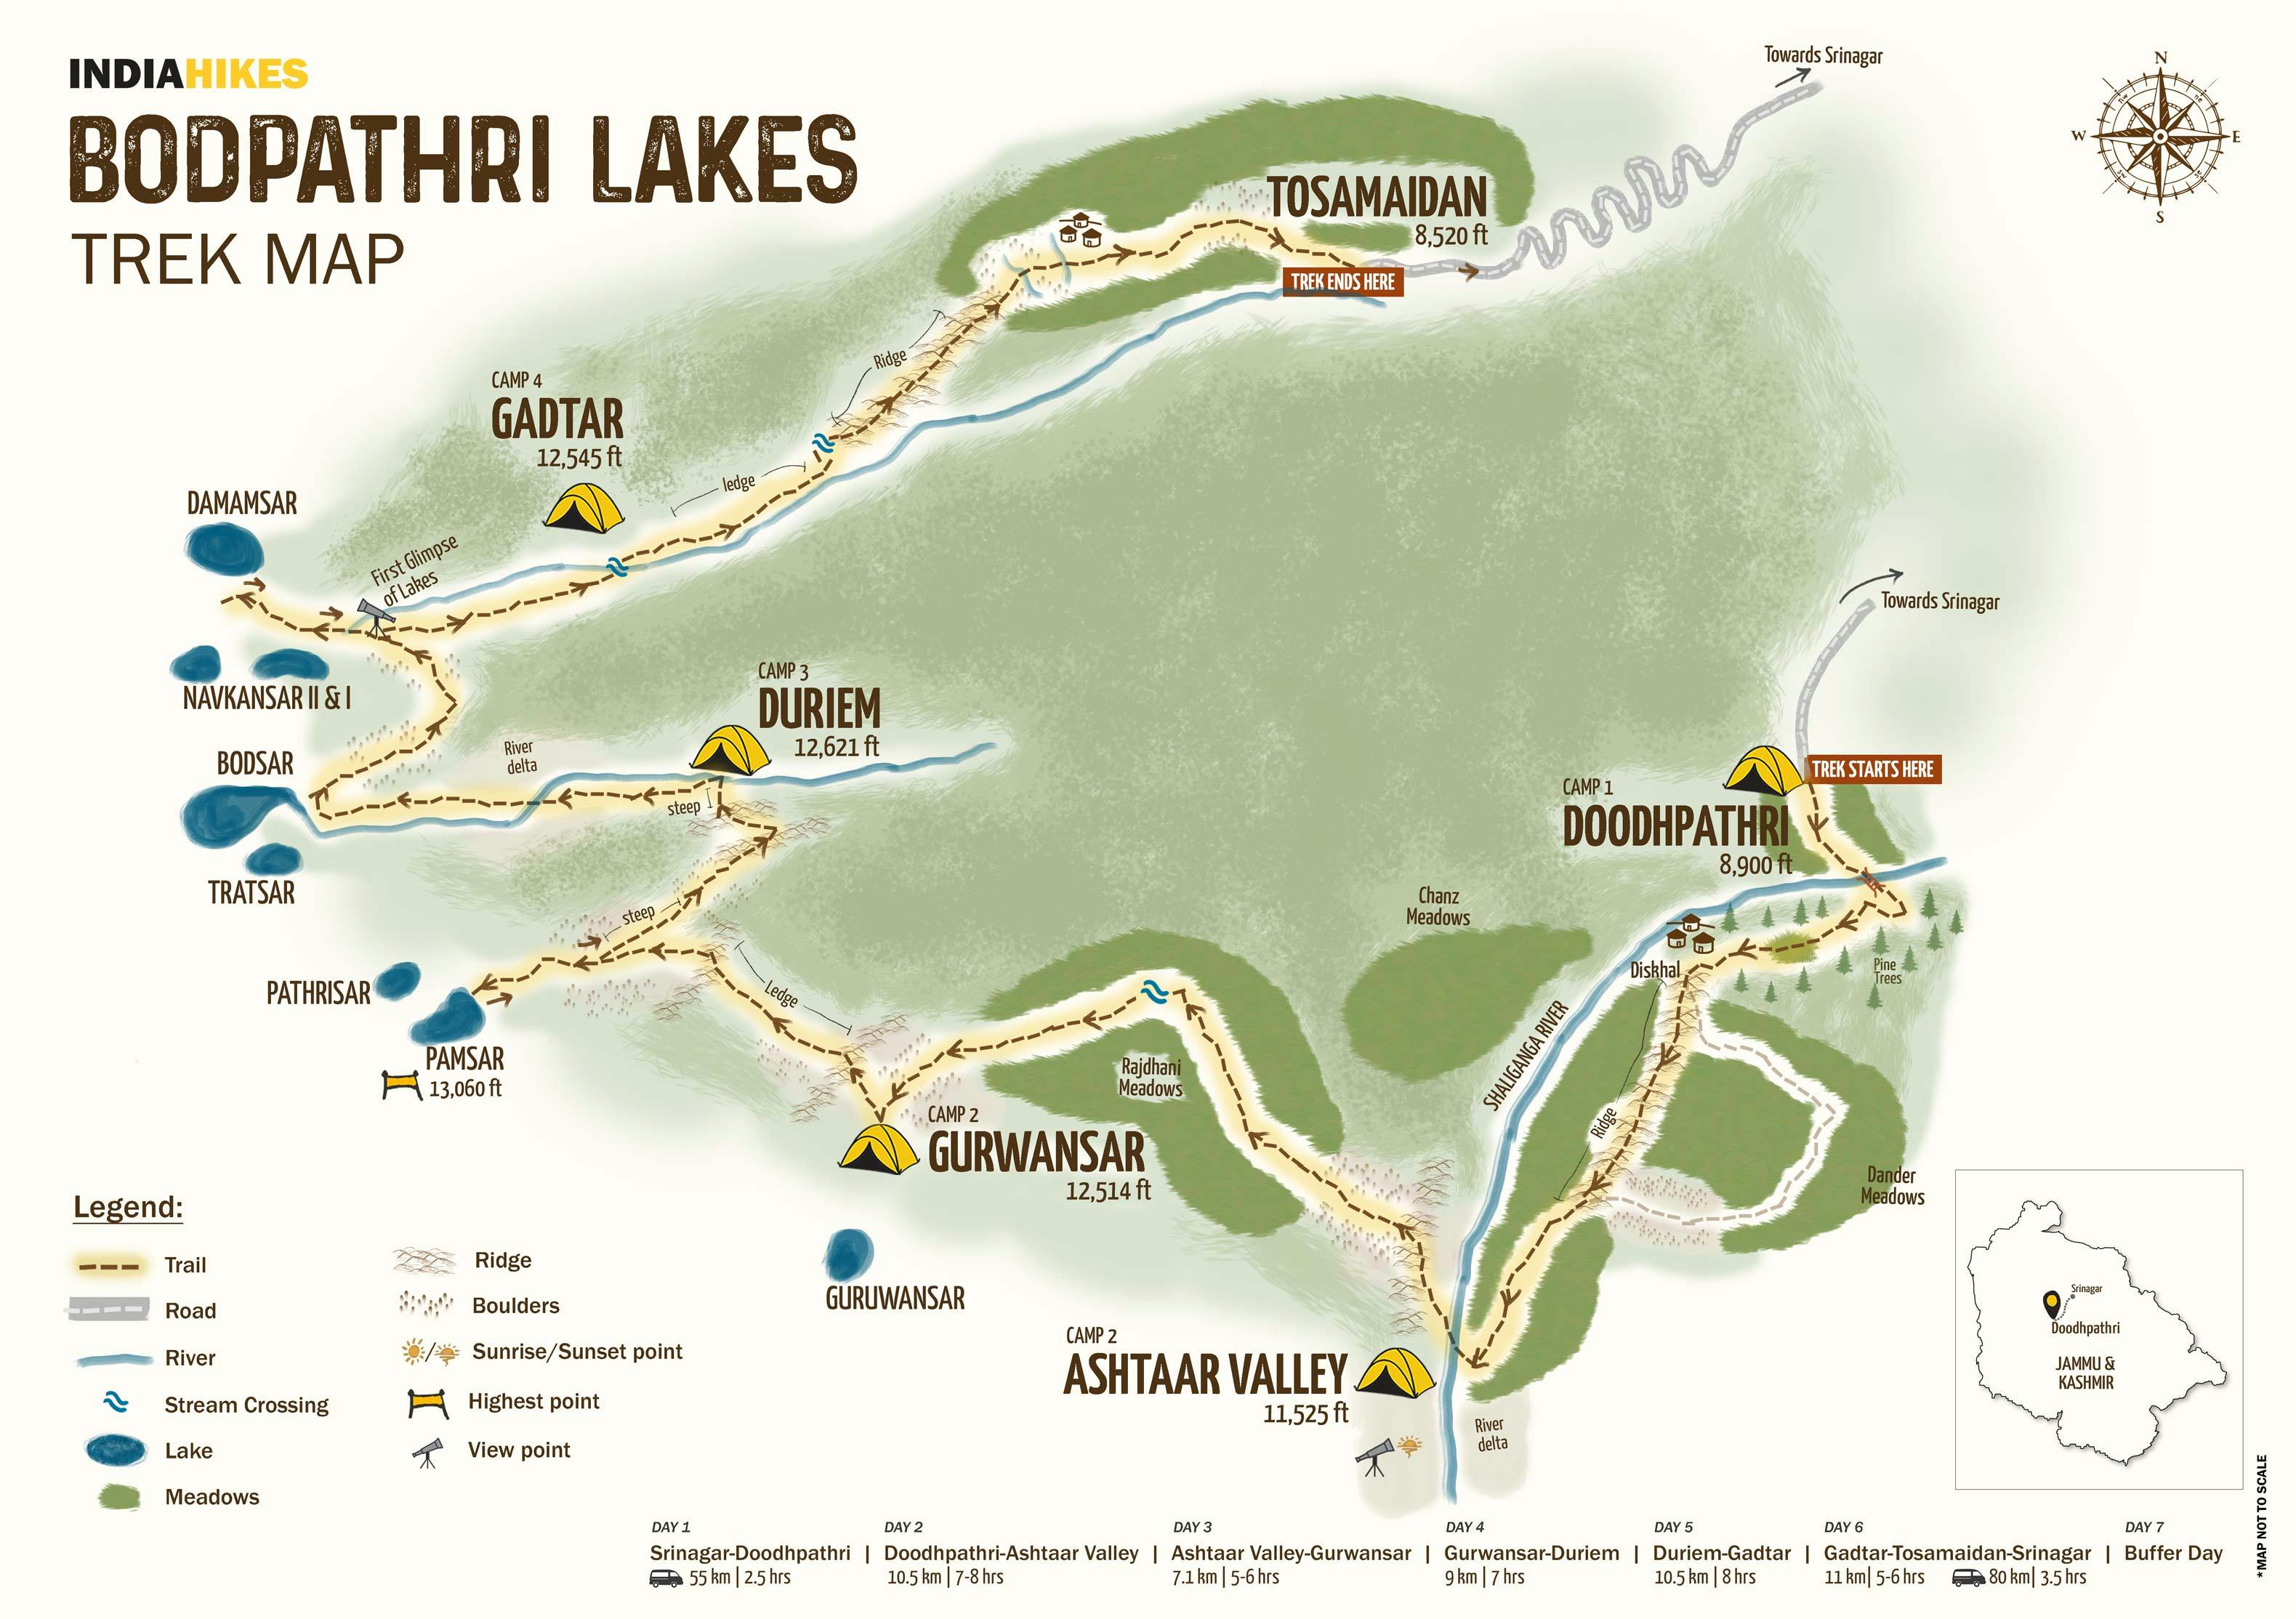 a9269a86 ca09 49ca bfad aac664dc5f45 indiahikes bodpathri lakes map